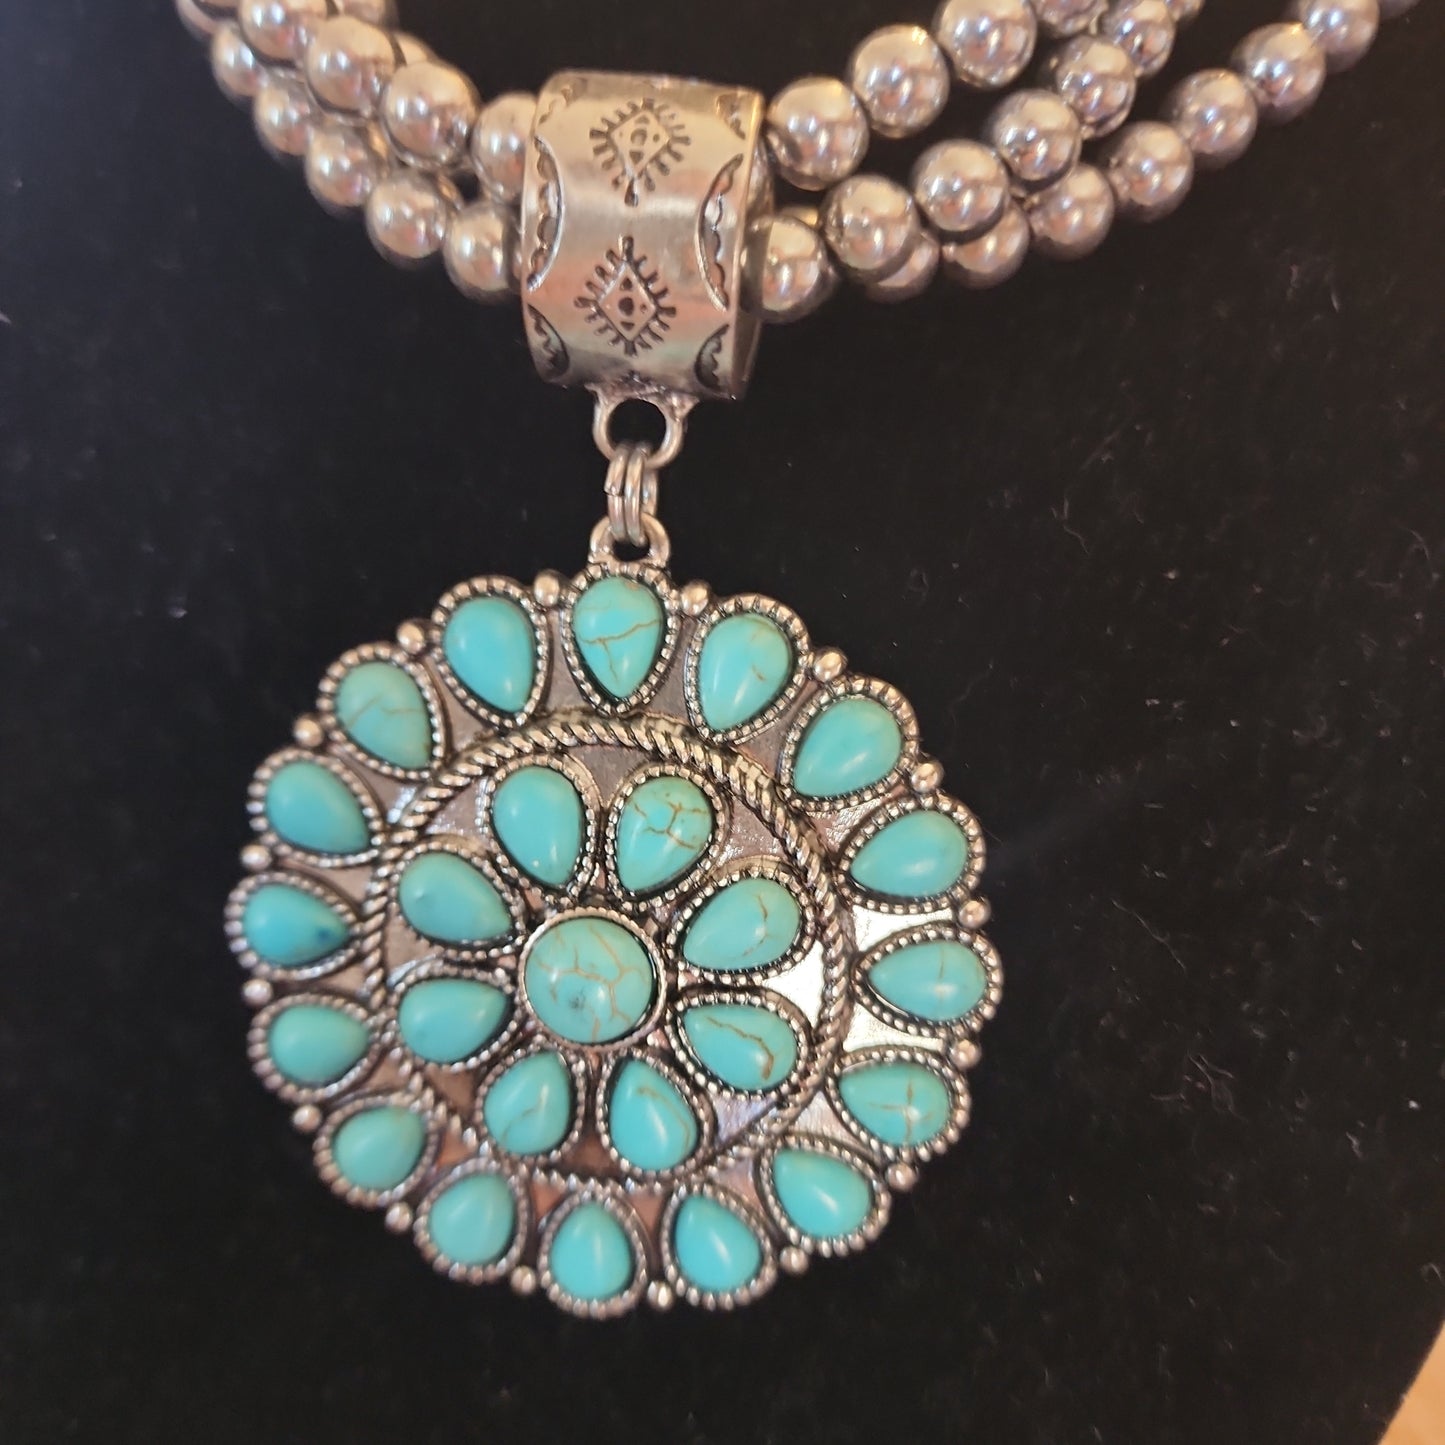 Hesston Turquoise Concho Silvertone Necklace and Earrings Set